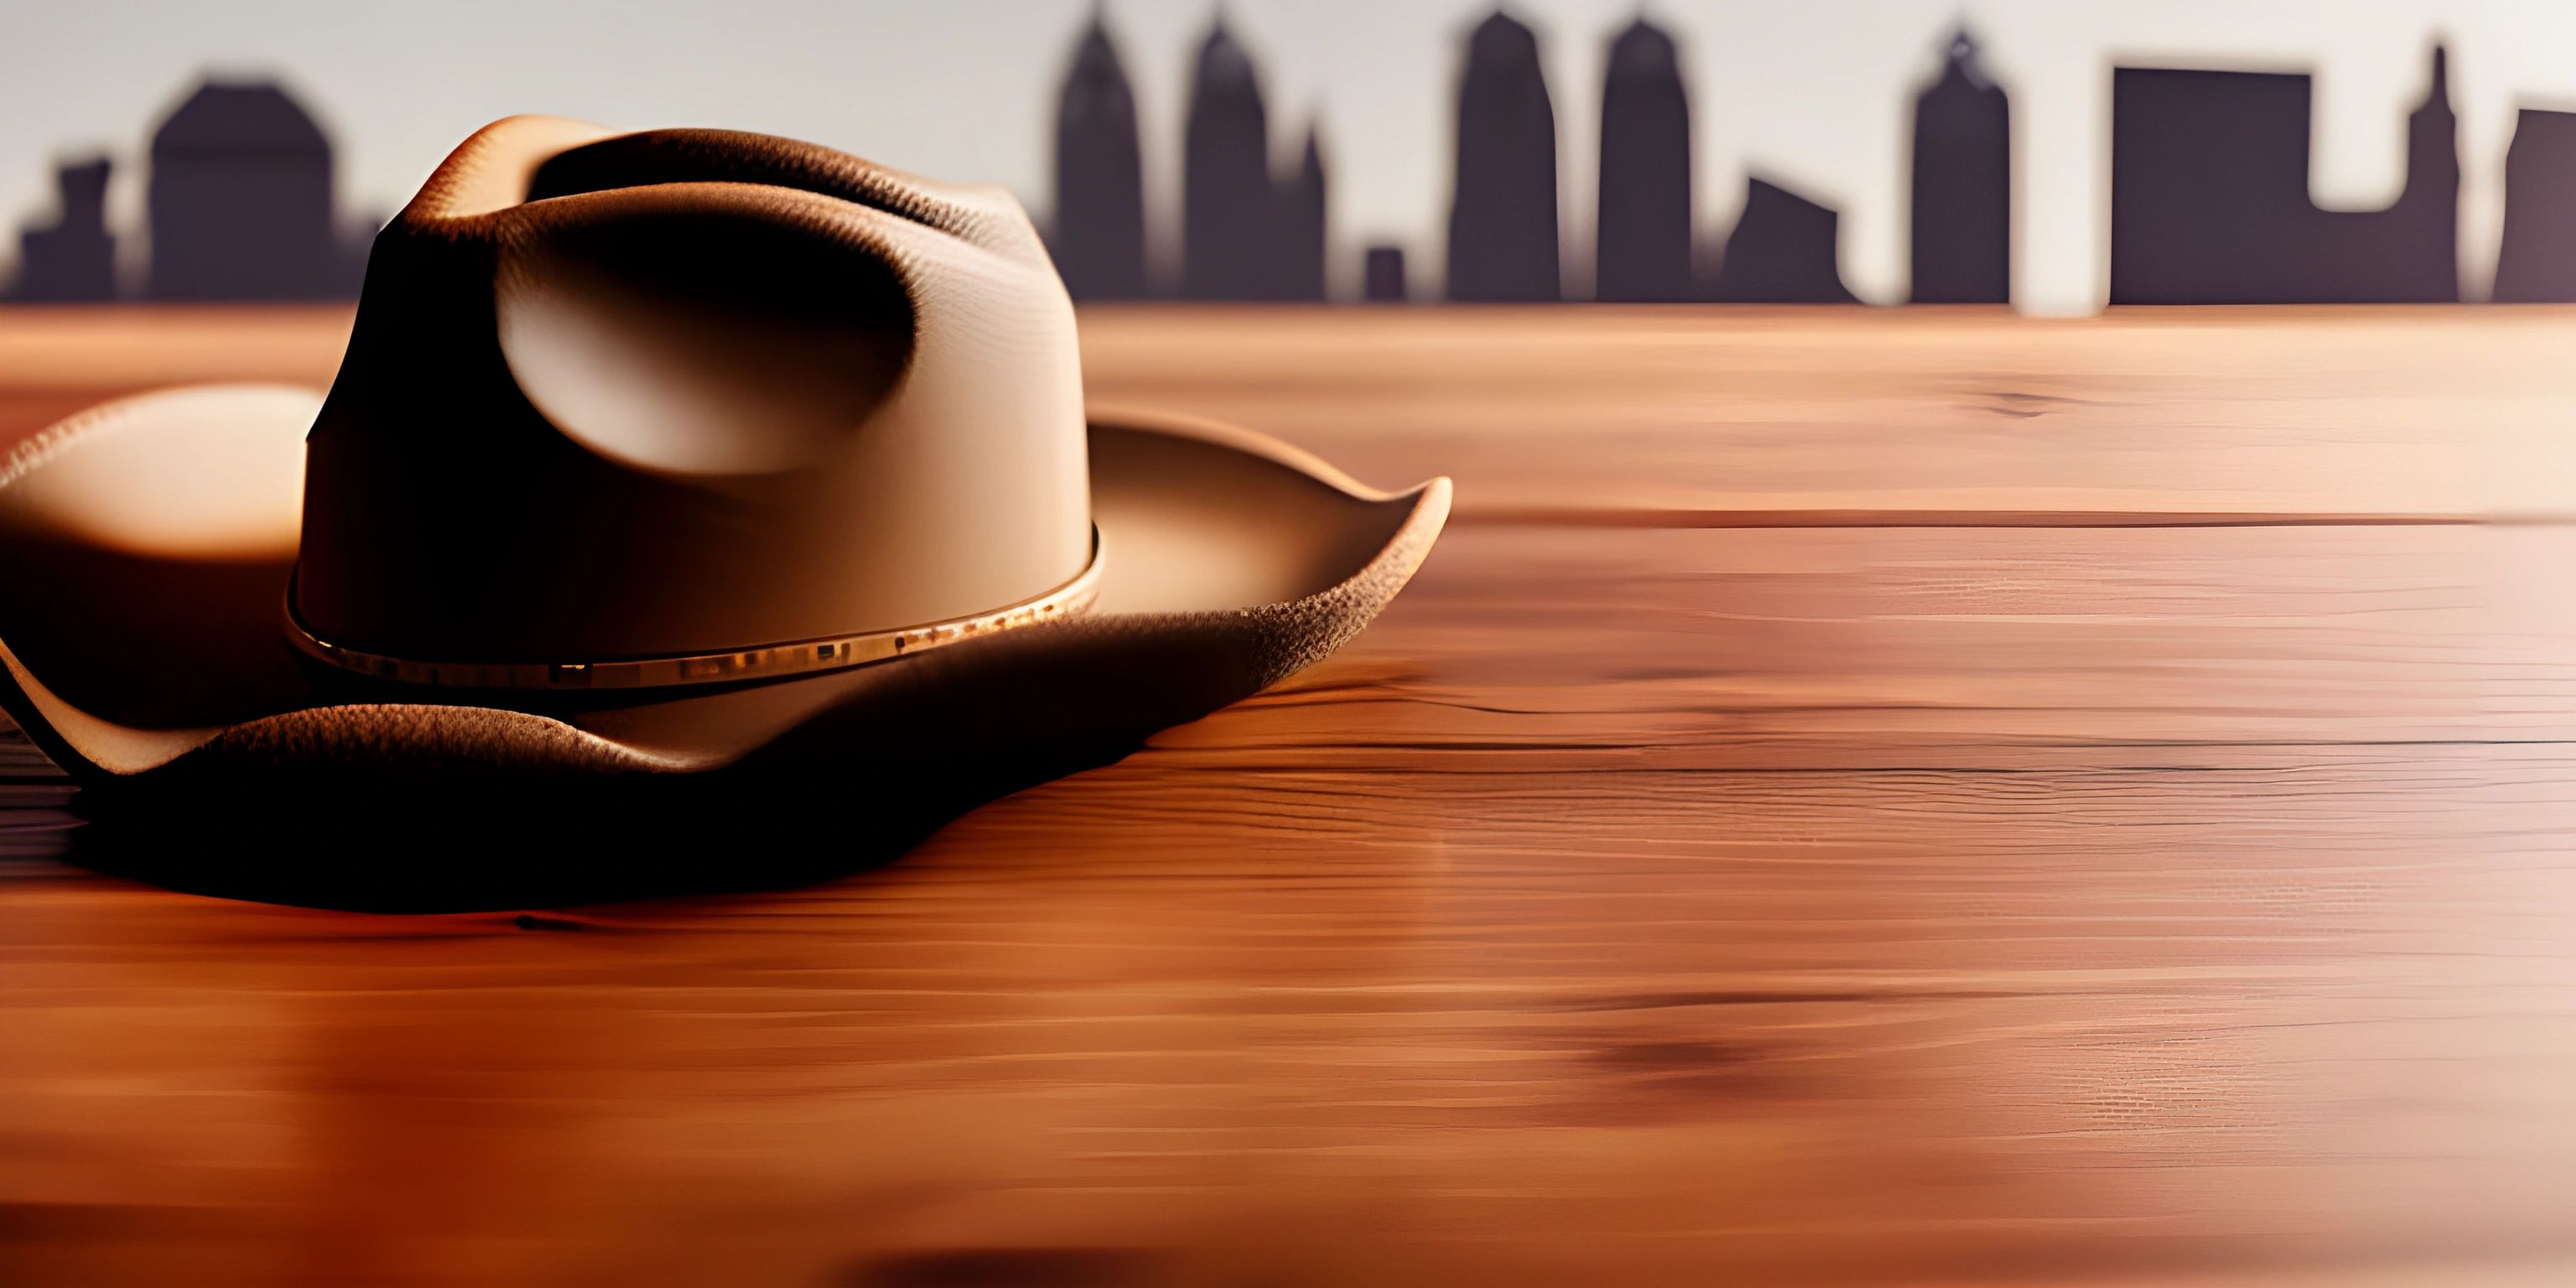 a western hat sits atop an empty wooden table with the city skyline in the background